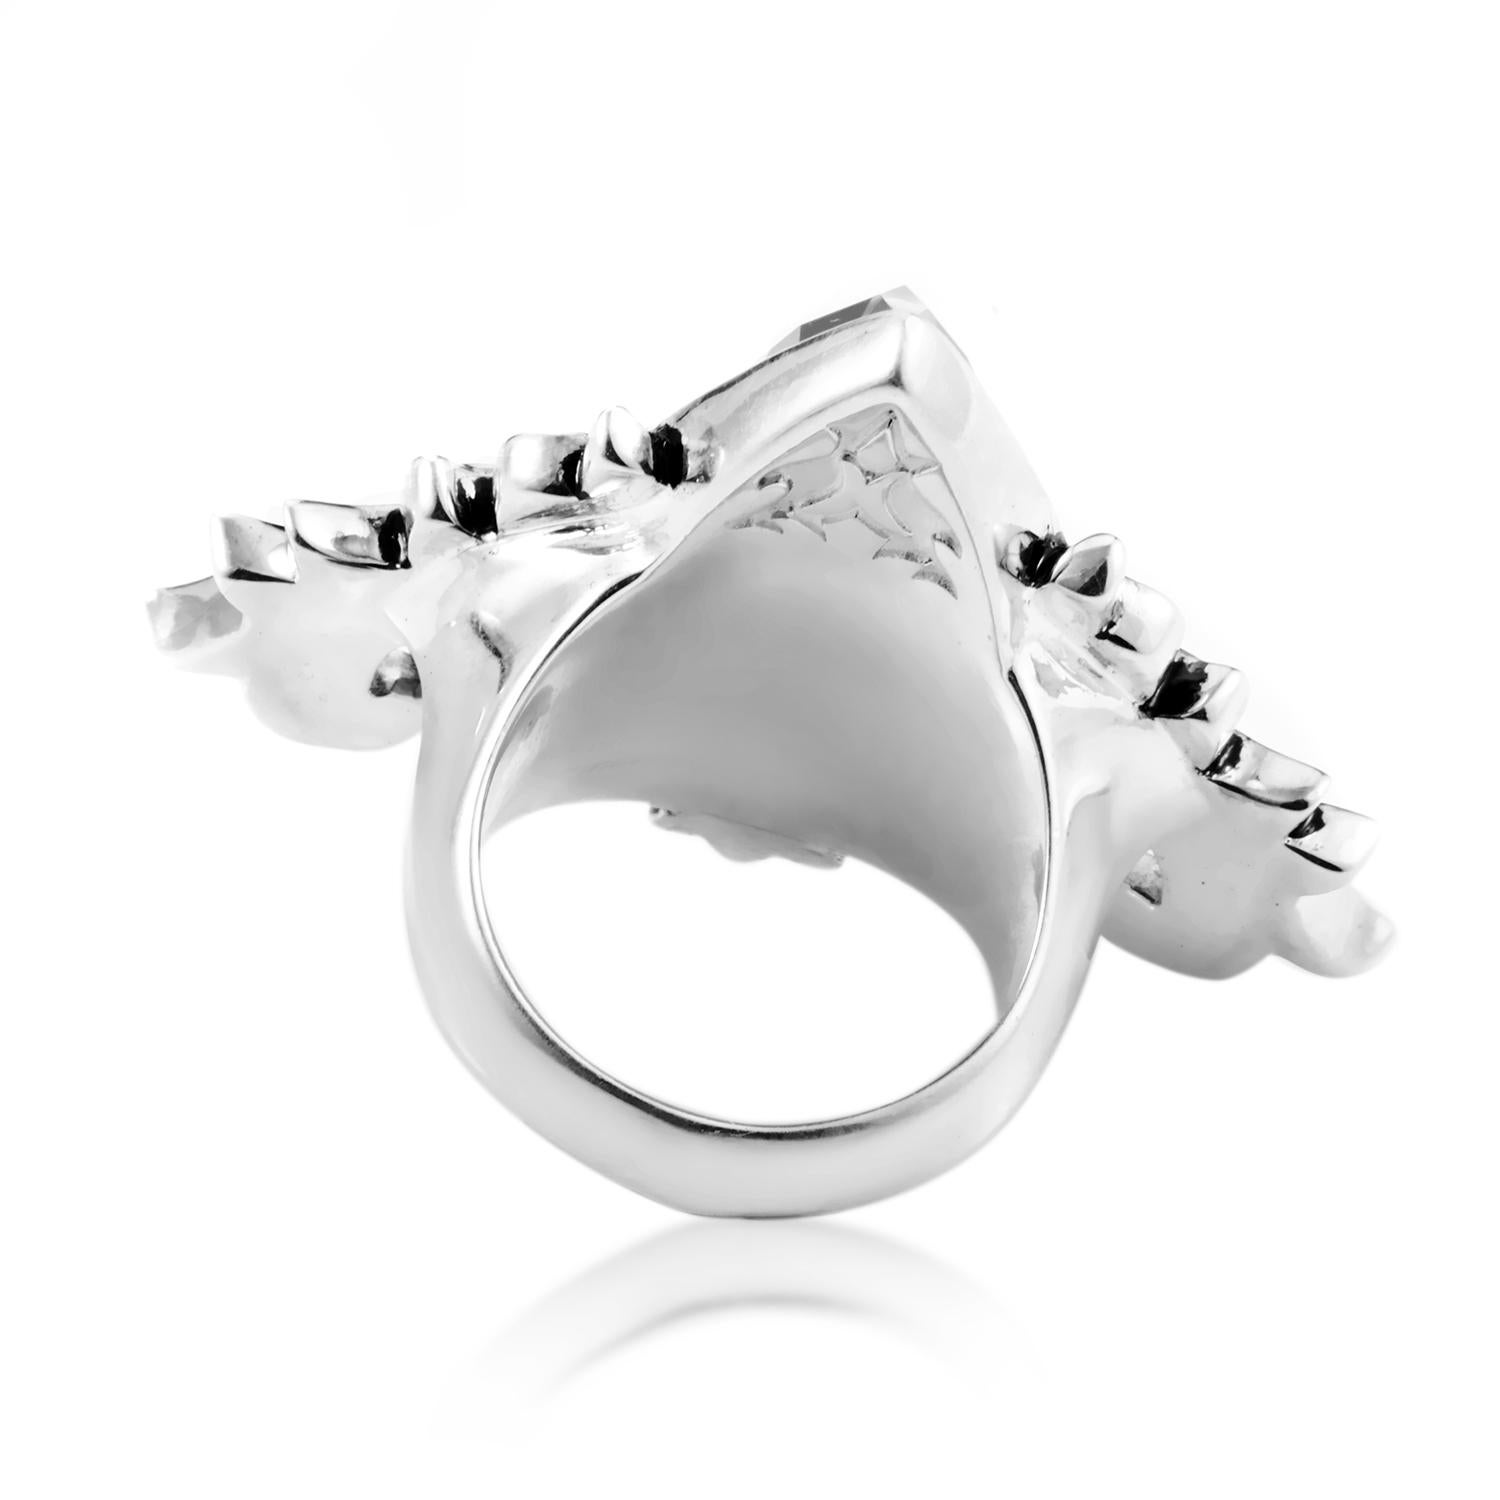 Stephen Webster Superstud Baroque Sterling Silver Cat's Eye and Quartz Ring In New Condition For Sale In Southampton, PA